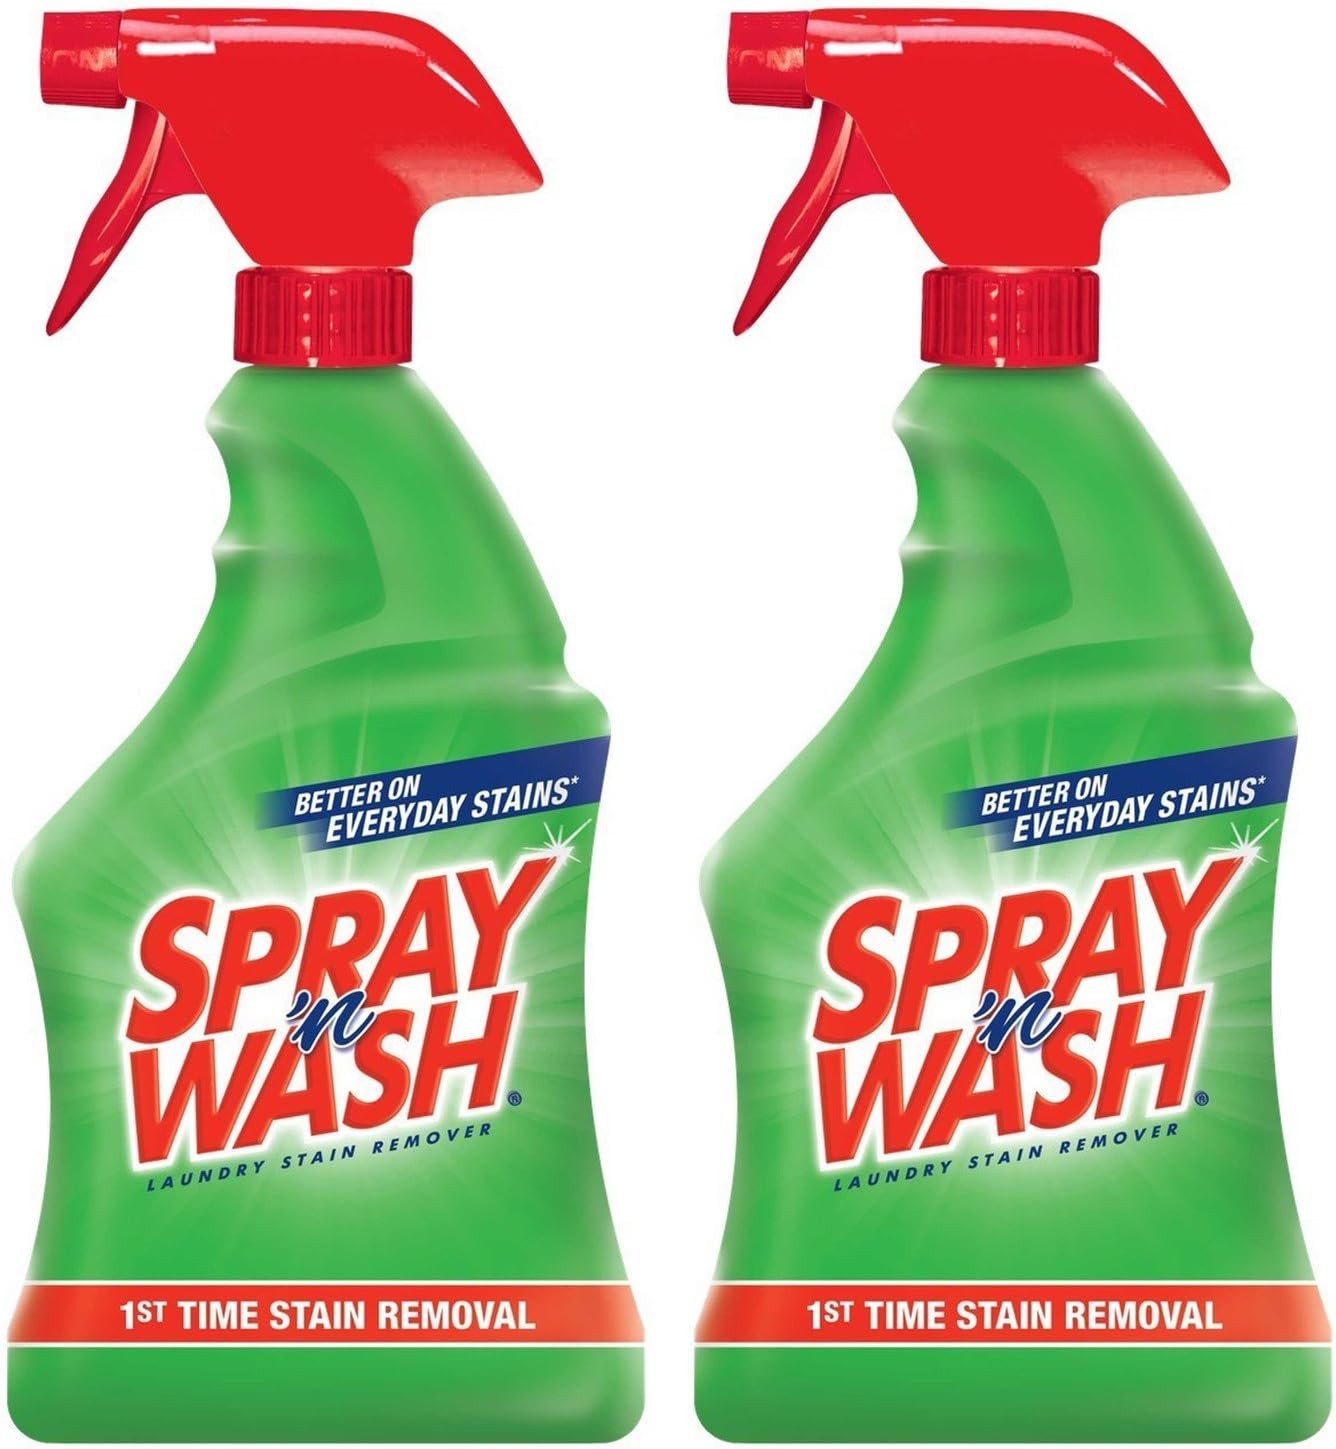 Spray 'n Wash Pre-Treat Laundry Stain Remover, 22 fl oz Bottle (Pack of 2) : Health & Household